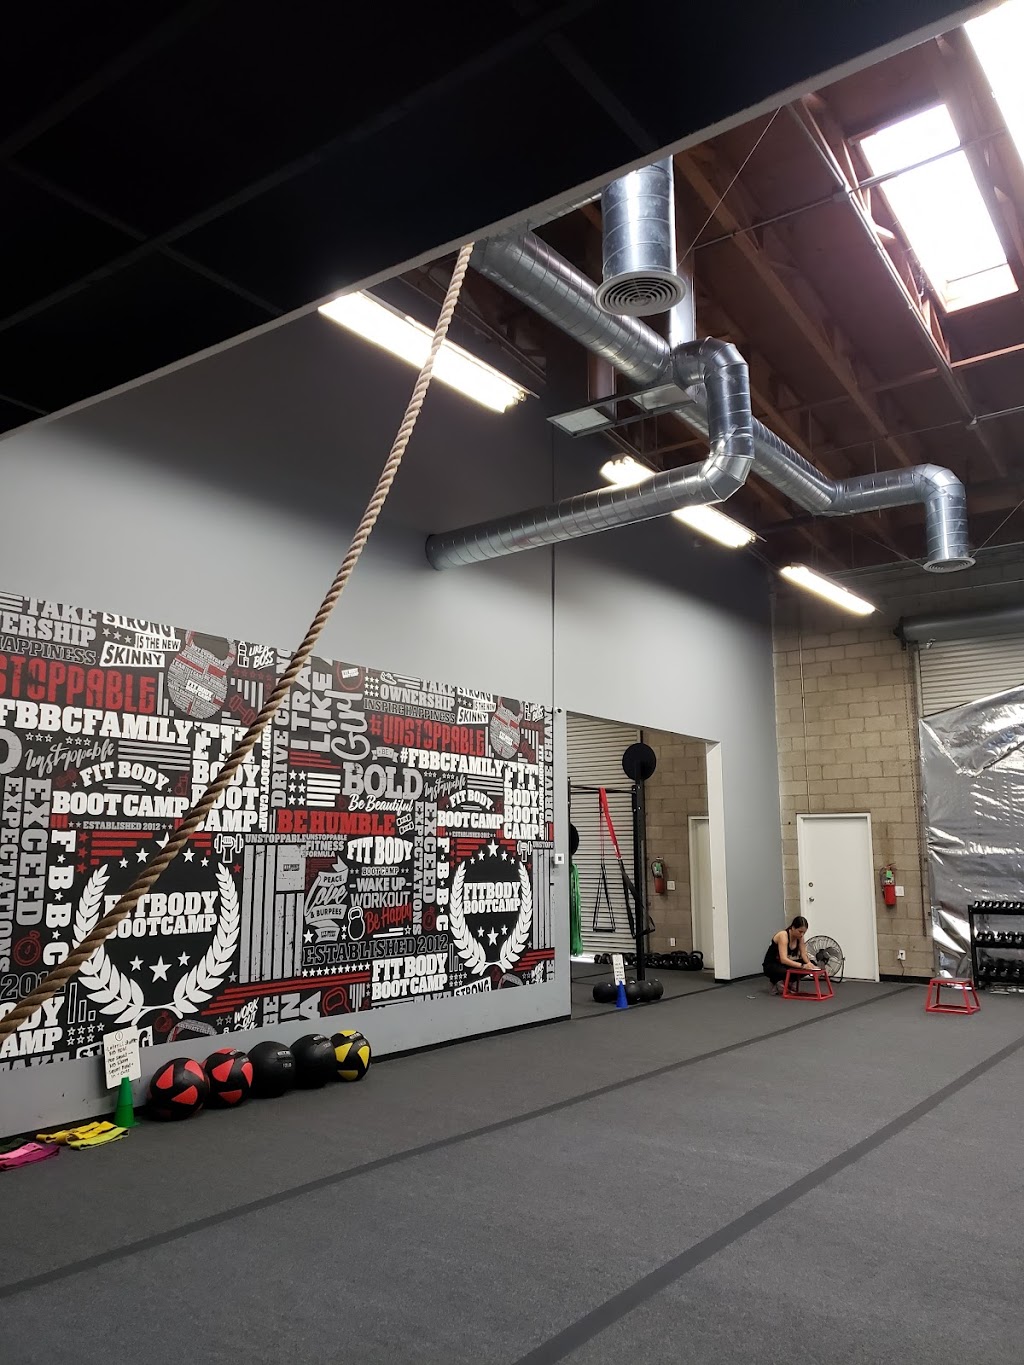 Jurupa Valley Fitness Boot Camp & Training Center | 9215 Orco Pkwy Suite J, Jurupa Valley, CA 92509 | Phone: (951) 332-0817